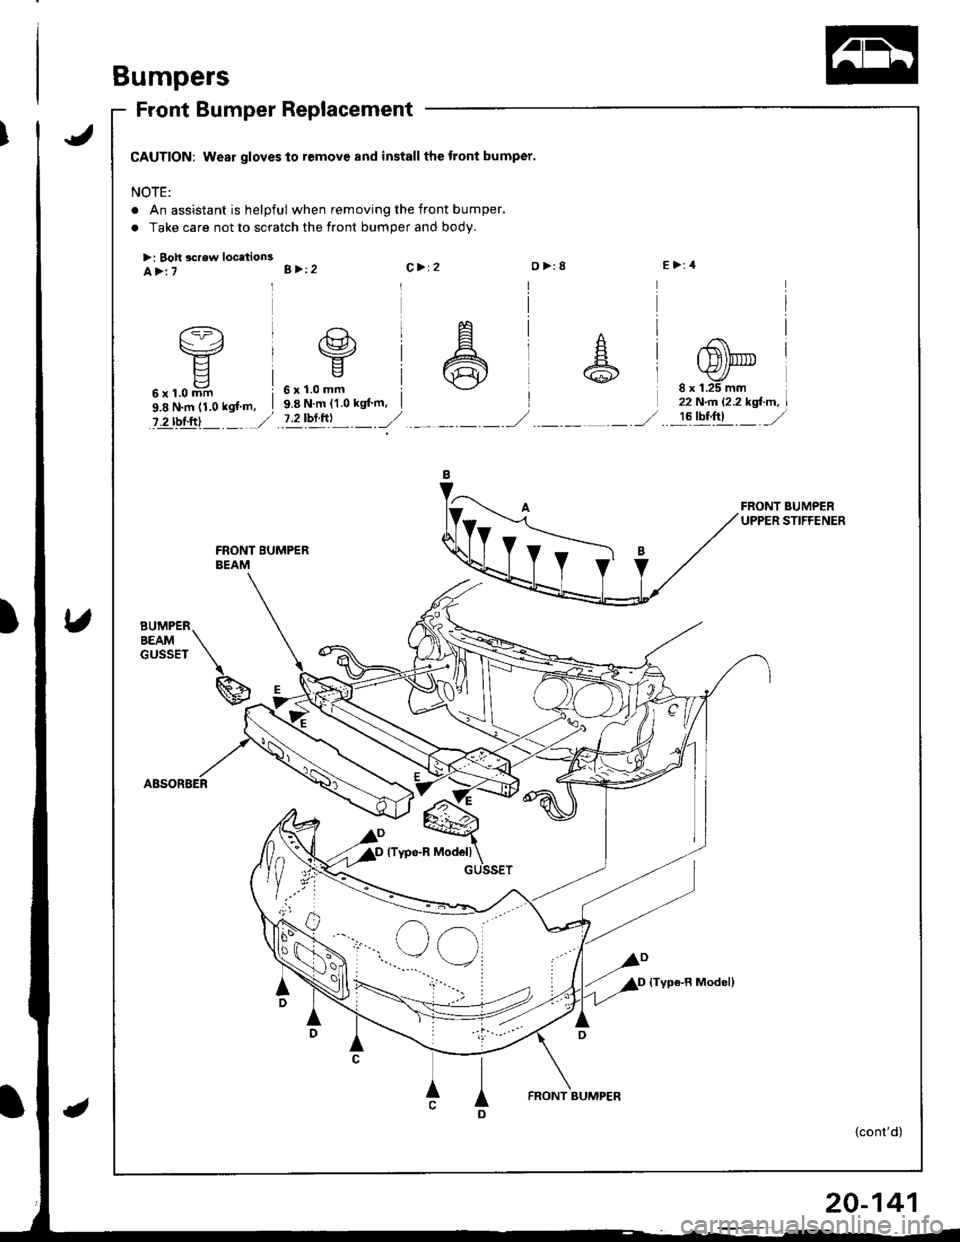 HONDA INTEGRA 1998 4.G Workshop Manual Bumpers
Front Bumper Replacement
CAUTION: Wear gloves to remove and install the tront bumper.
NOTE:
. An assistant is helpful when removing the front bumper.
. Take care not to scratch the front bumpe